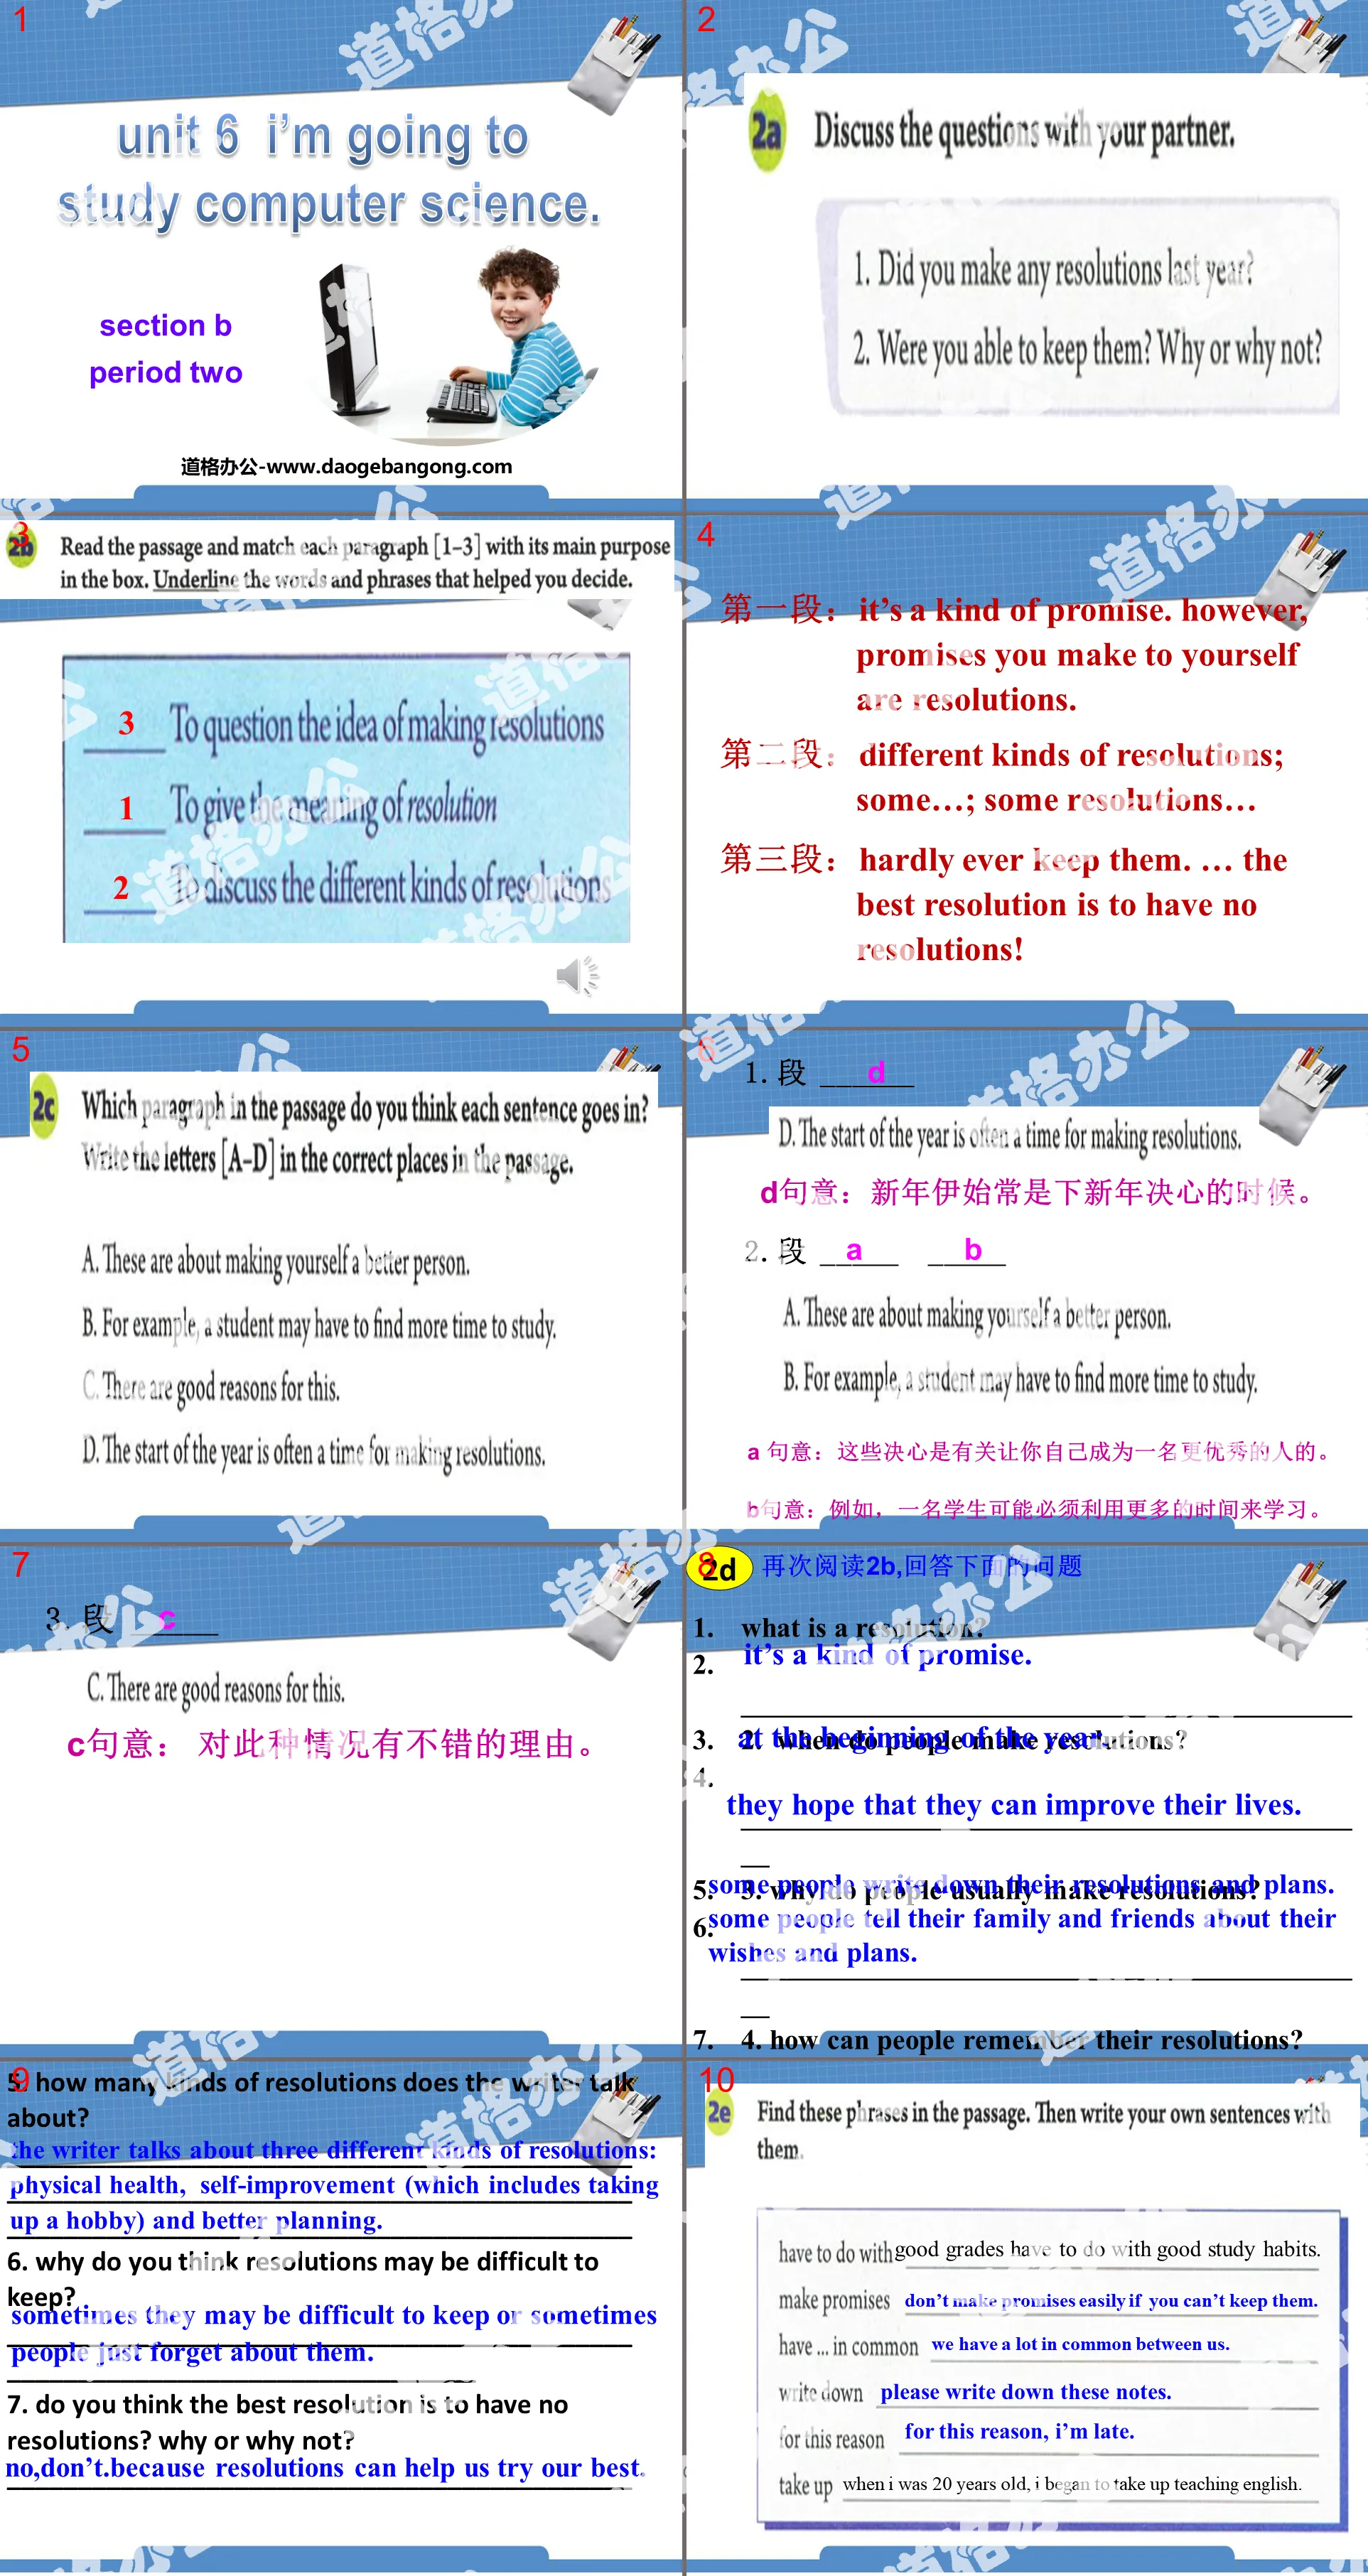 《I'm going to study computer science》PPT课件4
